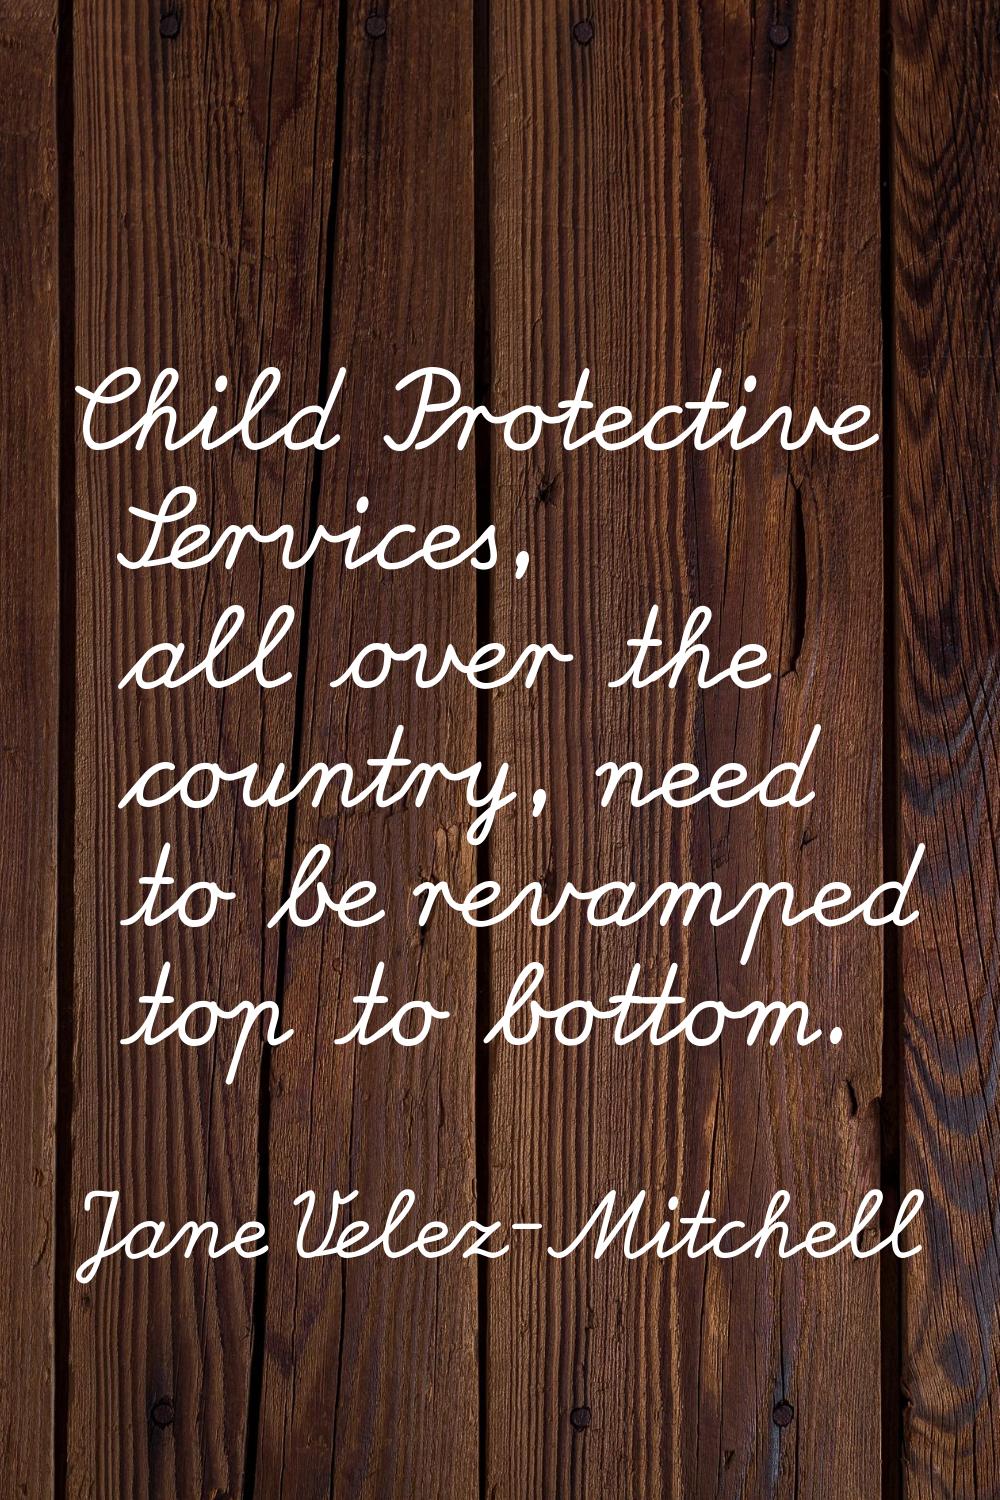 Child Protective Services, all over the country, need to be revamped top to bottom.